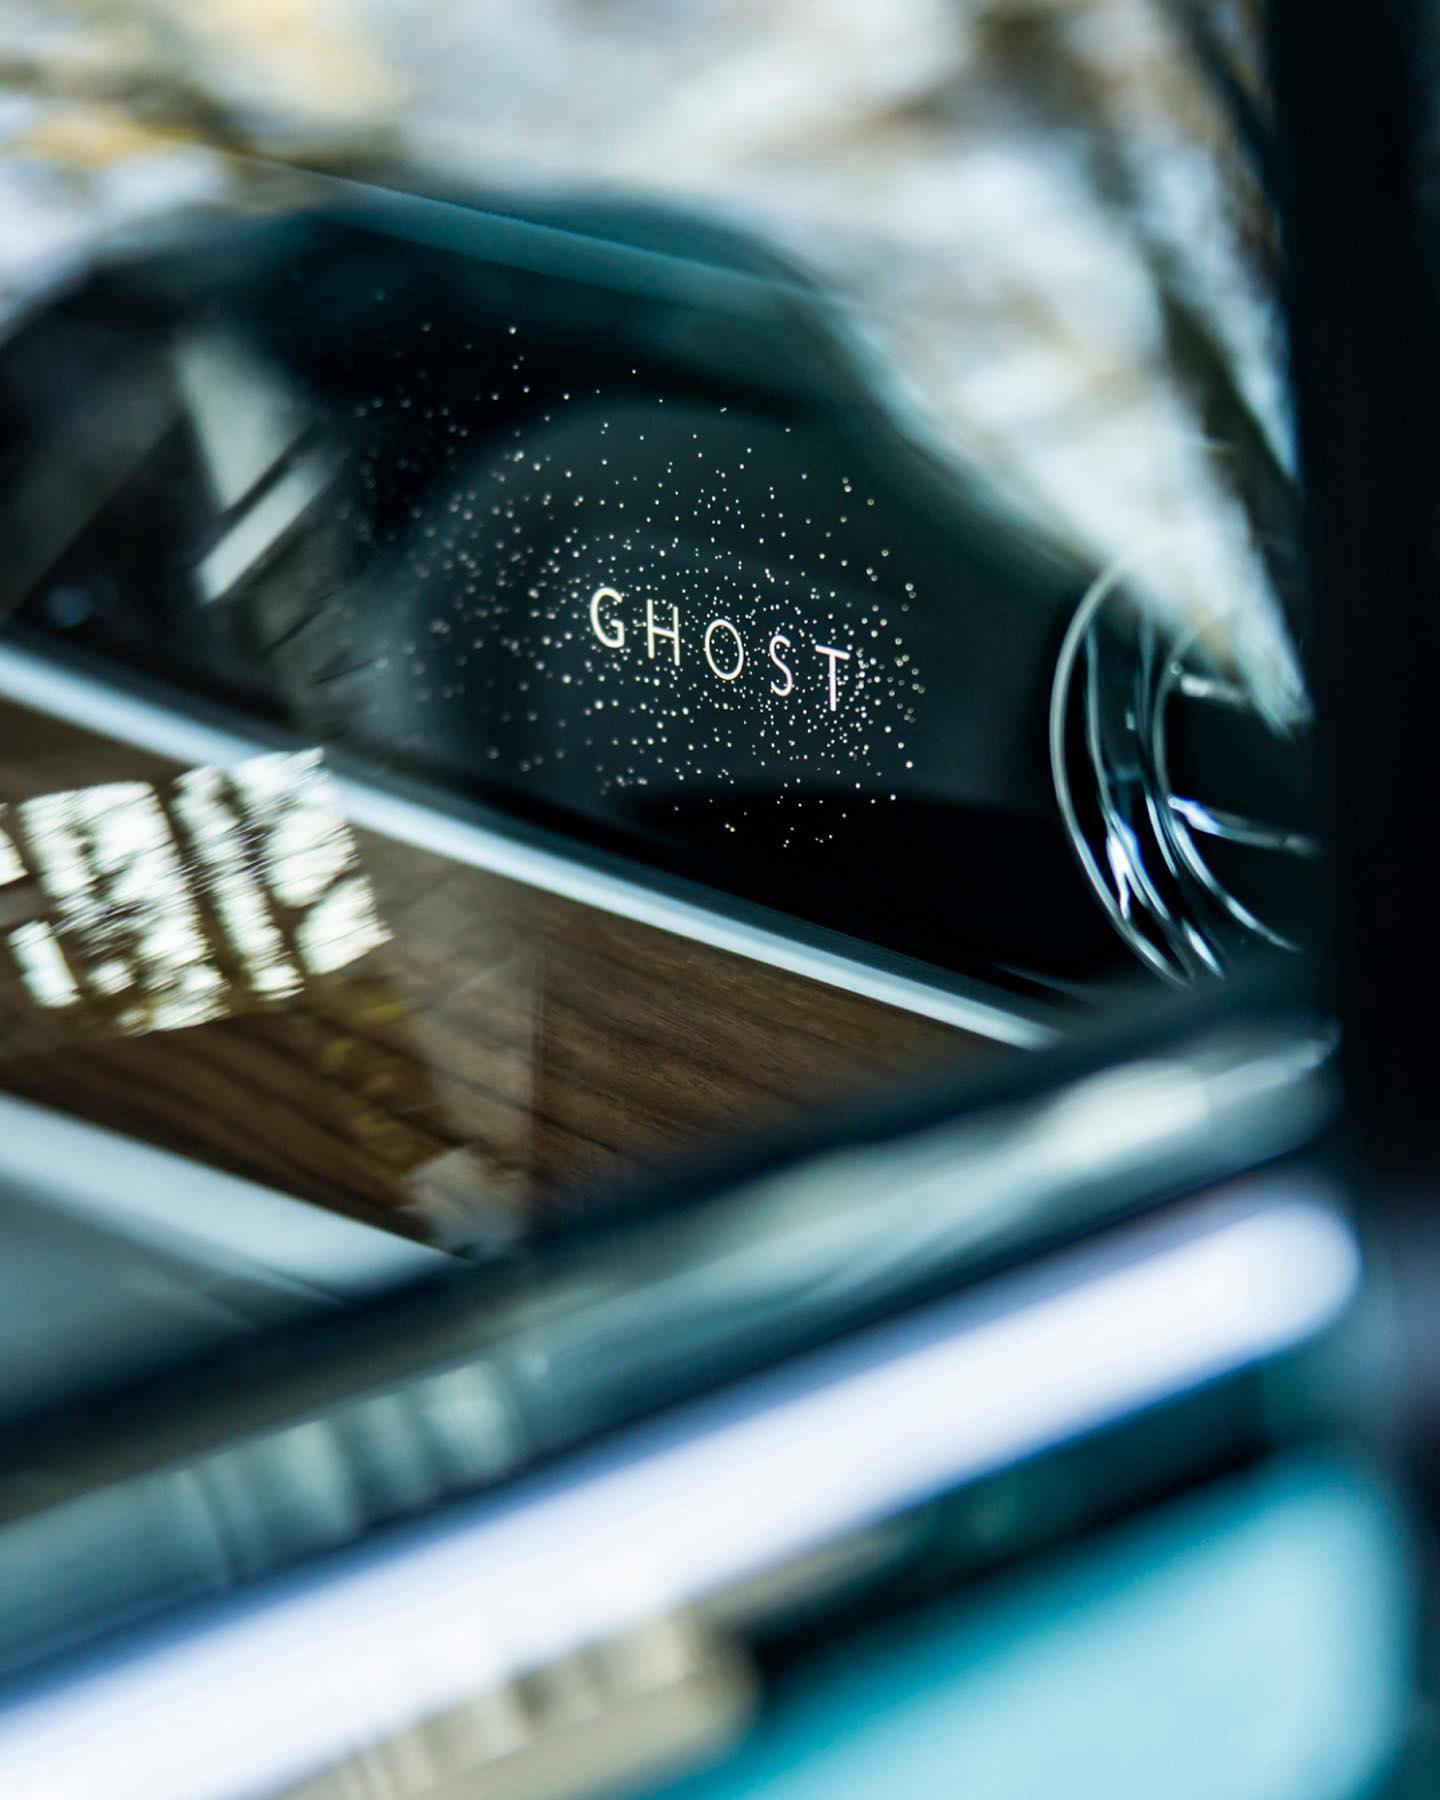 Rolls-Royce Motor Cars - Escape to a space of elegance with Ghost Extended